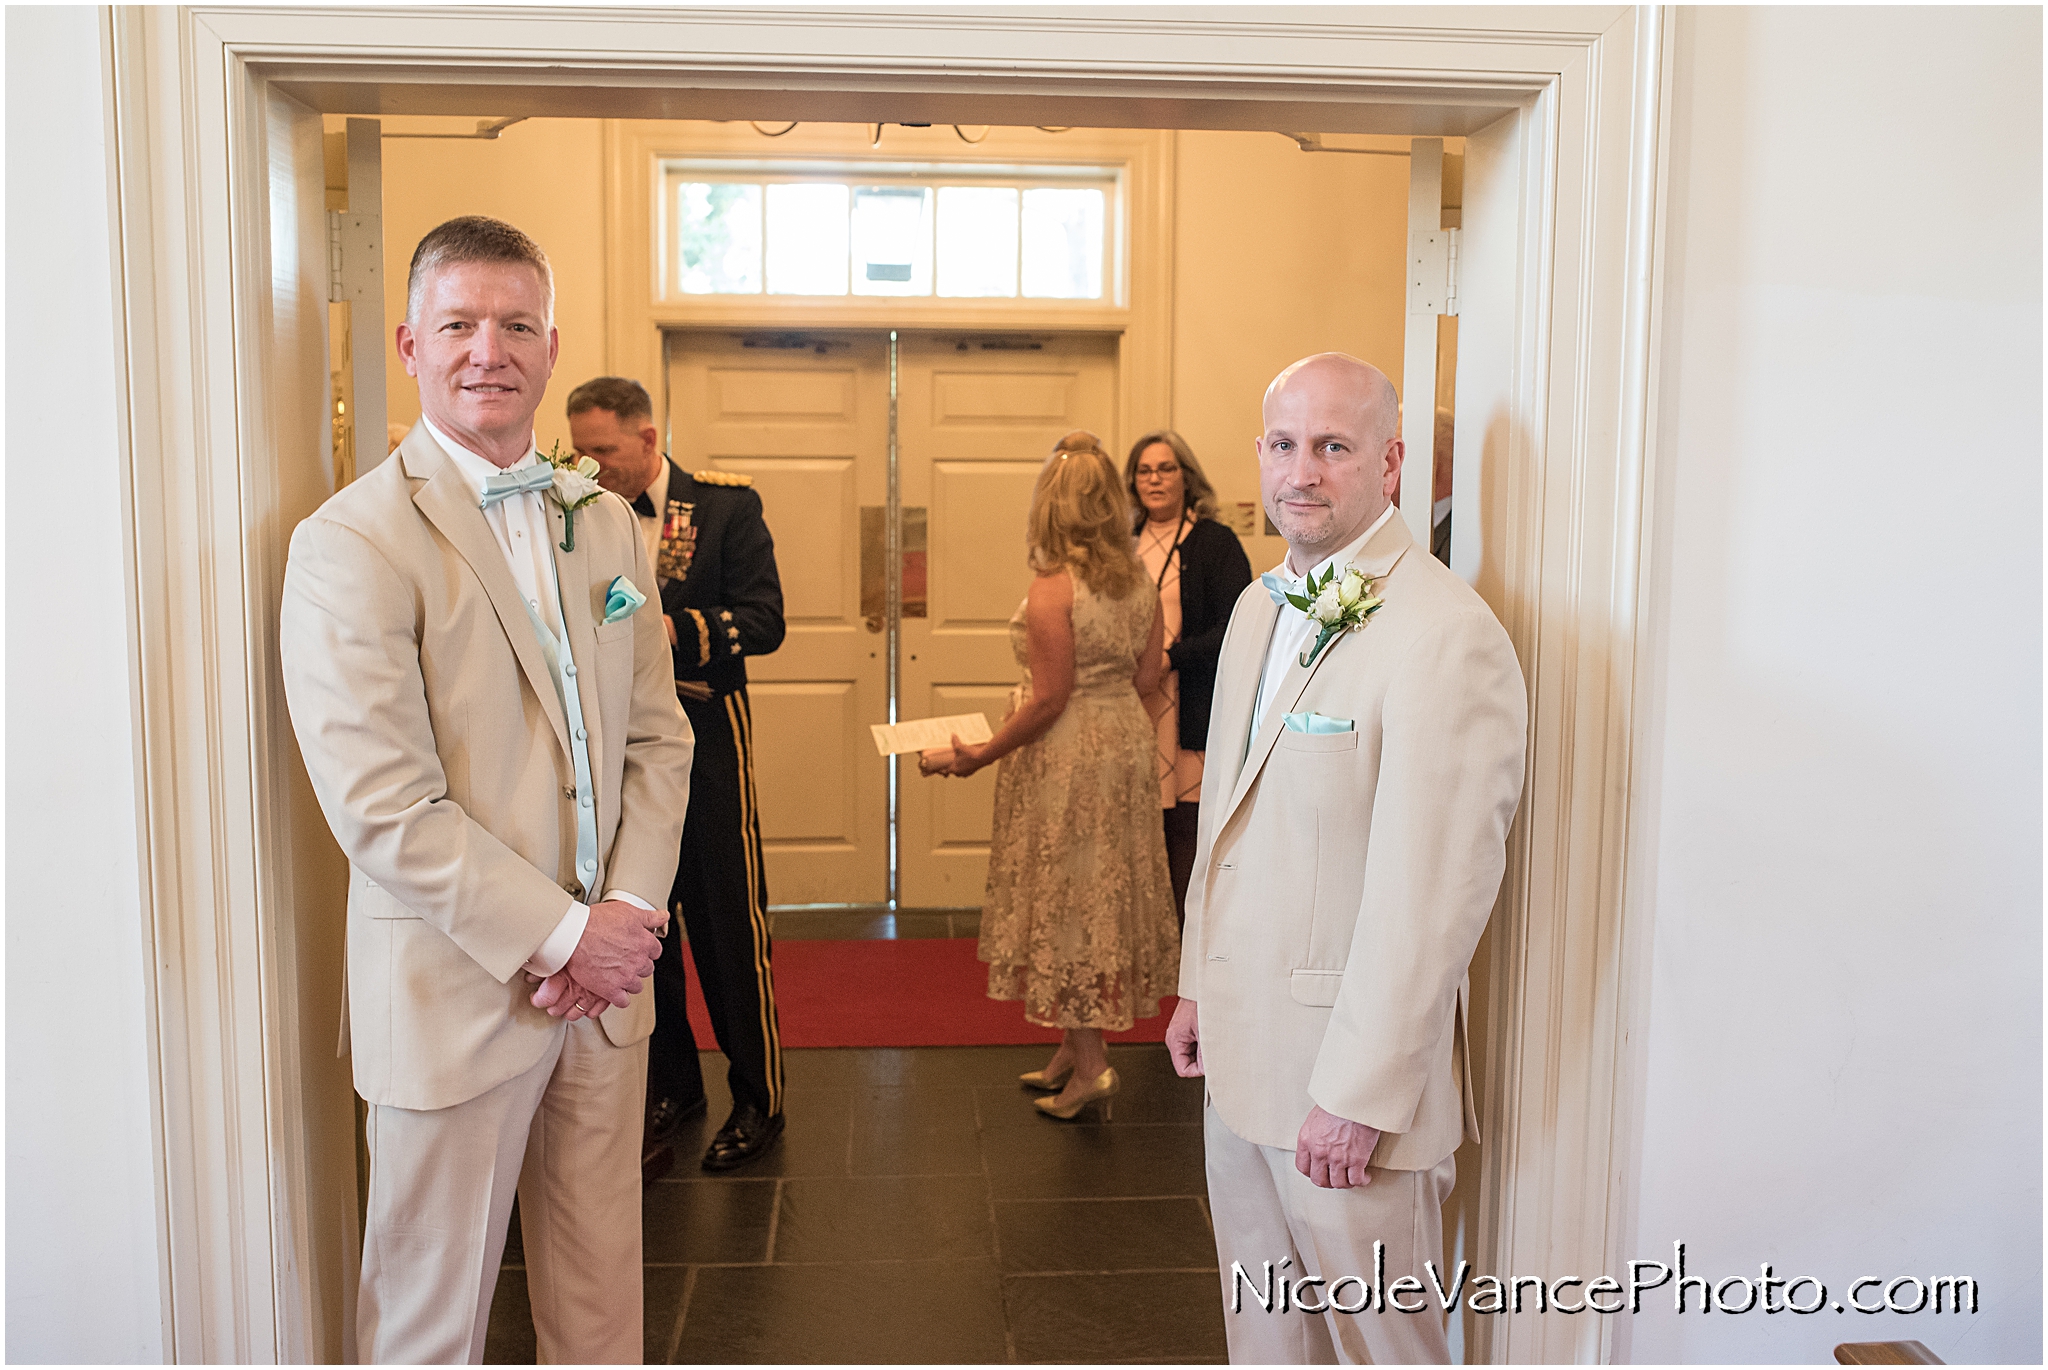 The ushers stand post before the ceremony at Crestwood Presbyterian Church in Chesterfield VA.